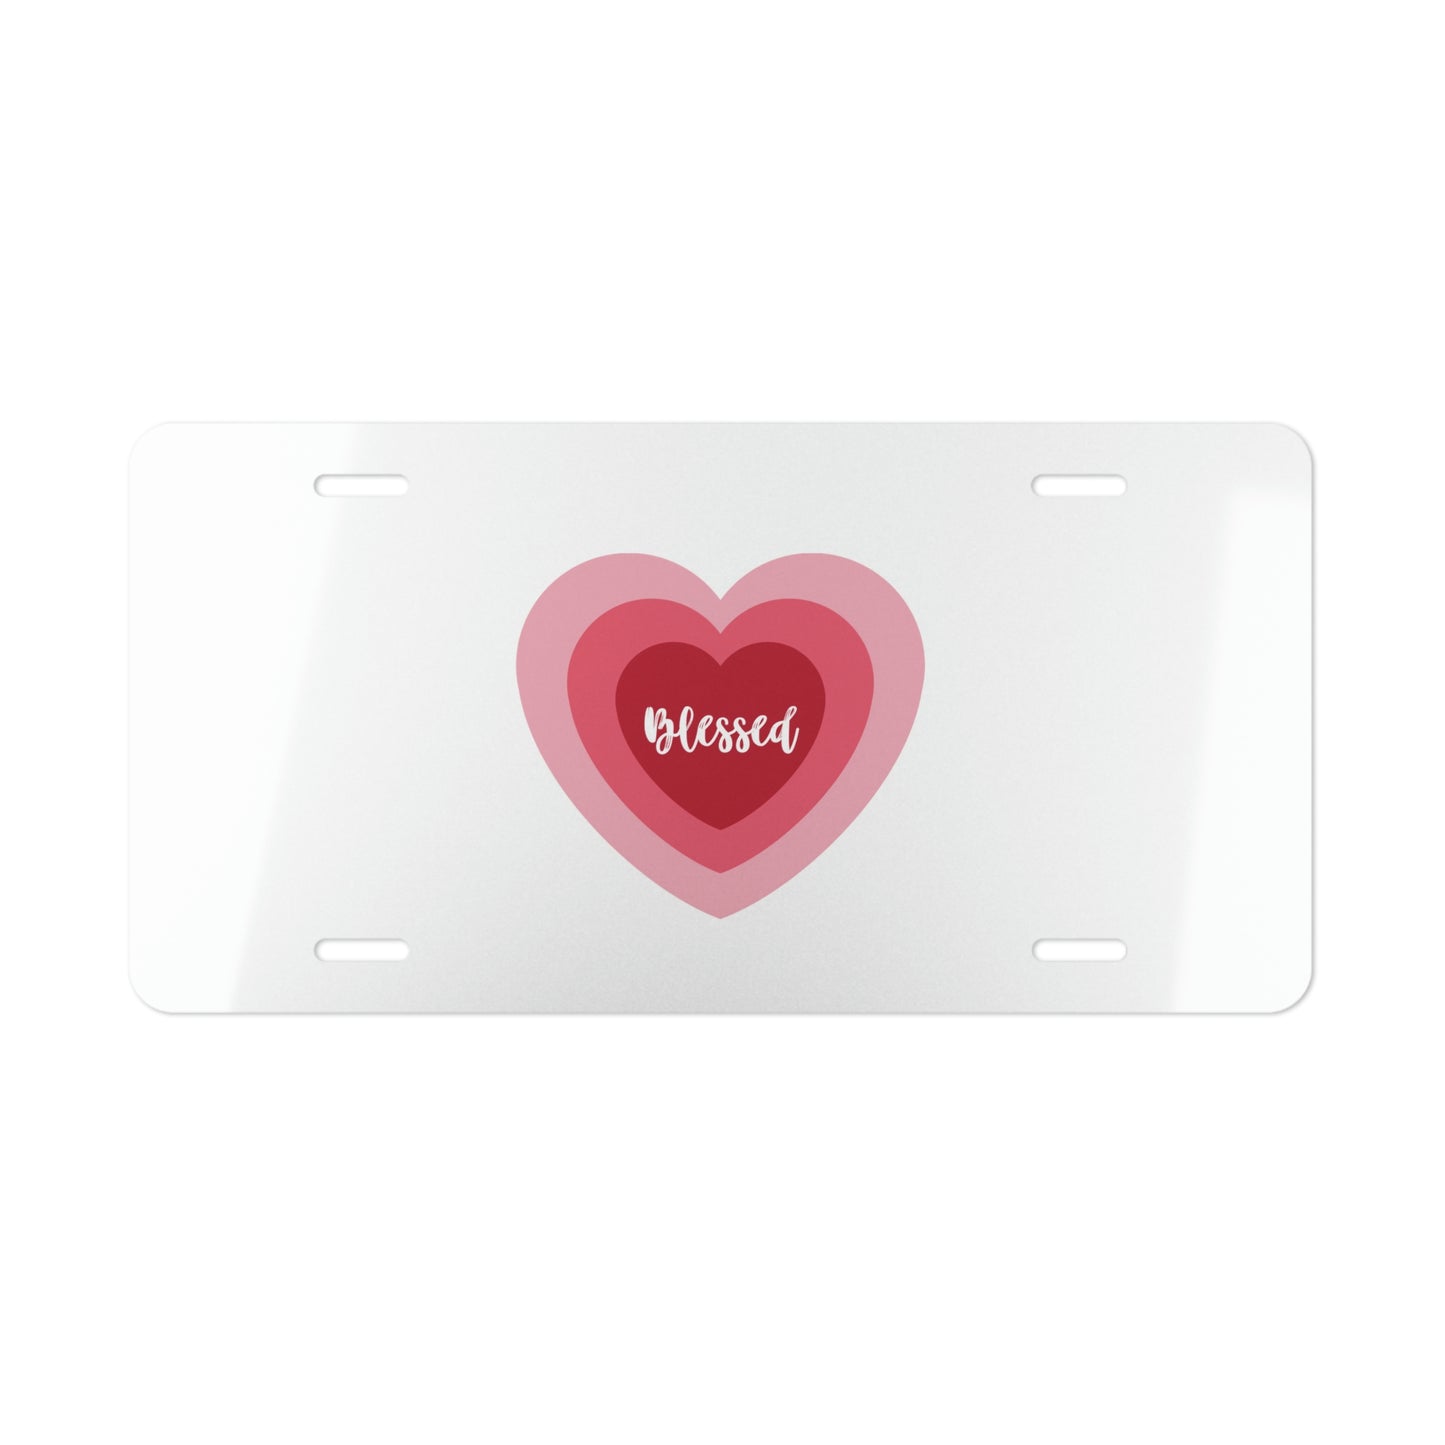 Blessed Heart License Plate - White